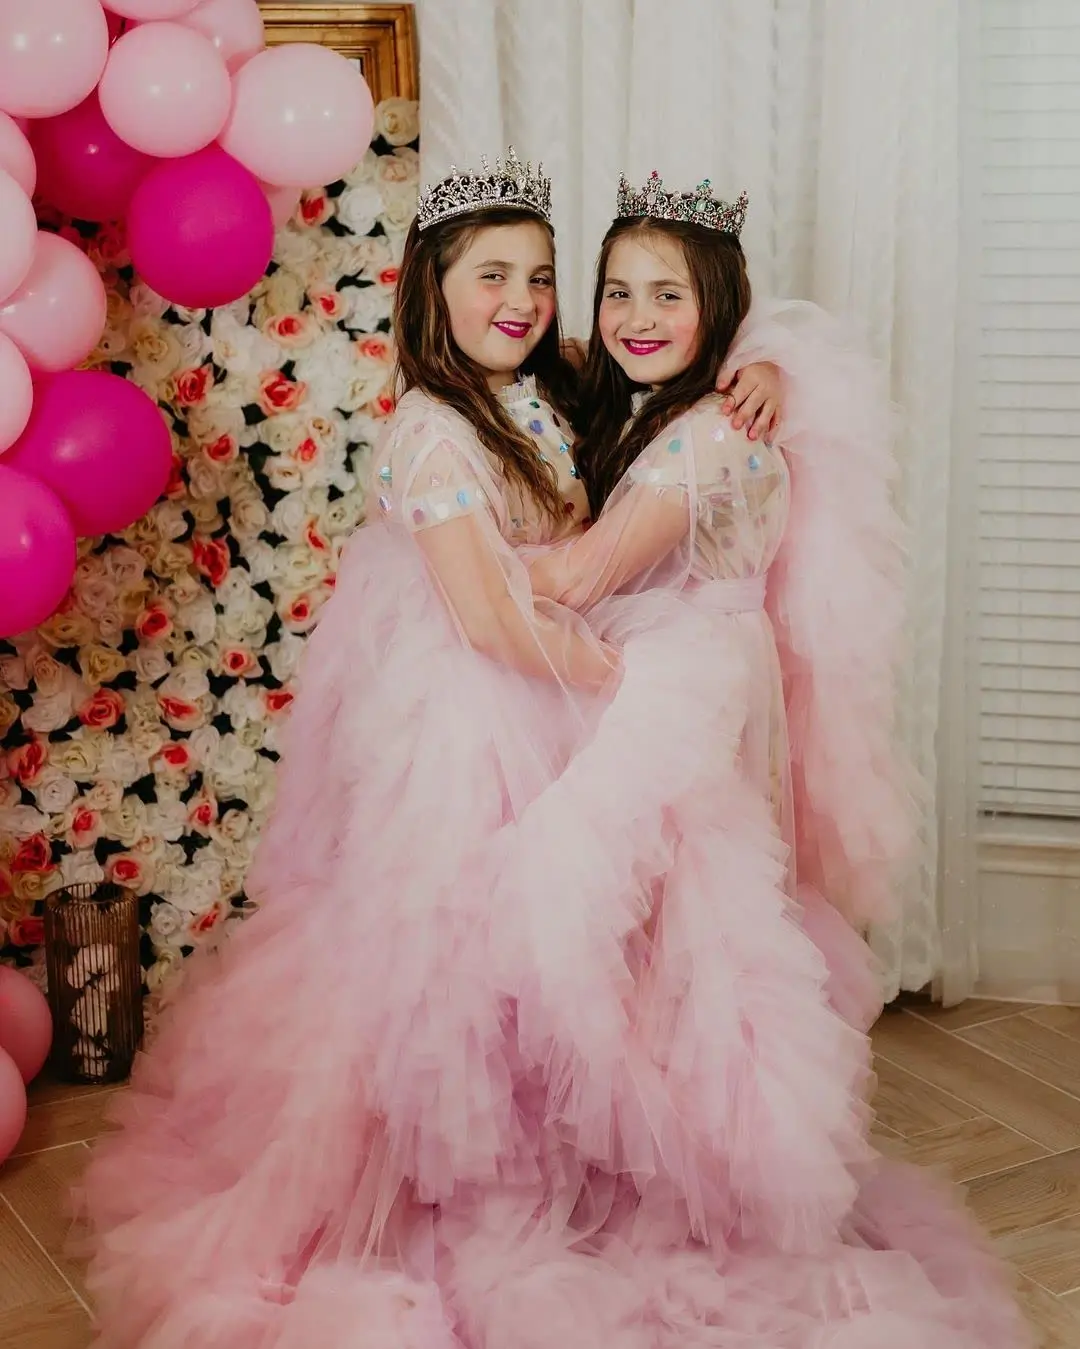 Ruffles Tulle Flower Girl Dress for Wedding Princess Kid Dressing Gown Sheer Photshoot Outfit